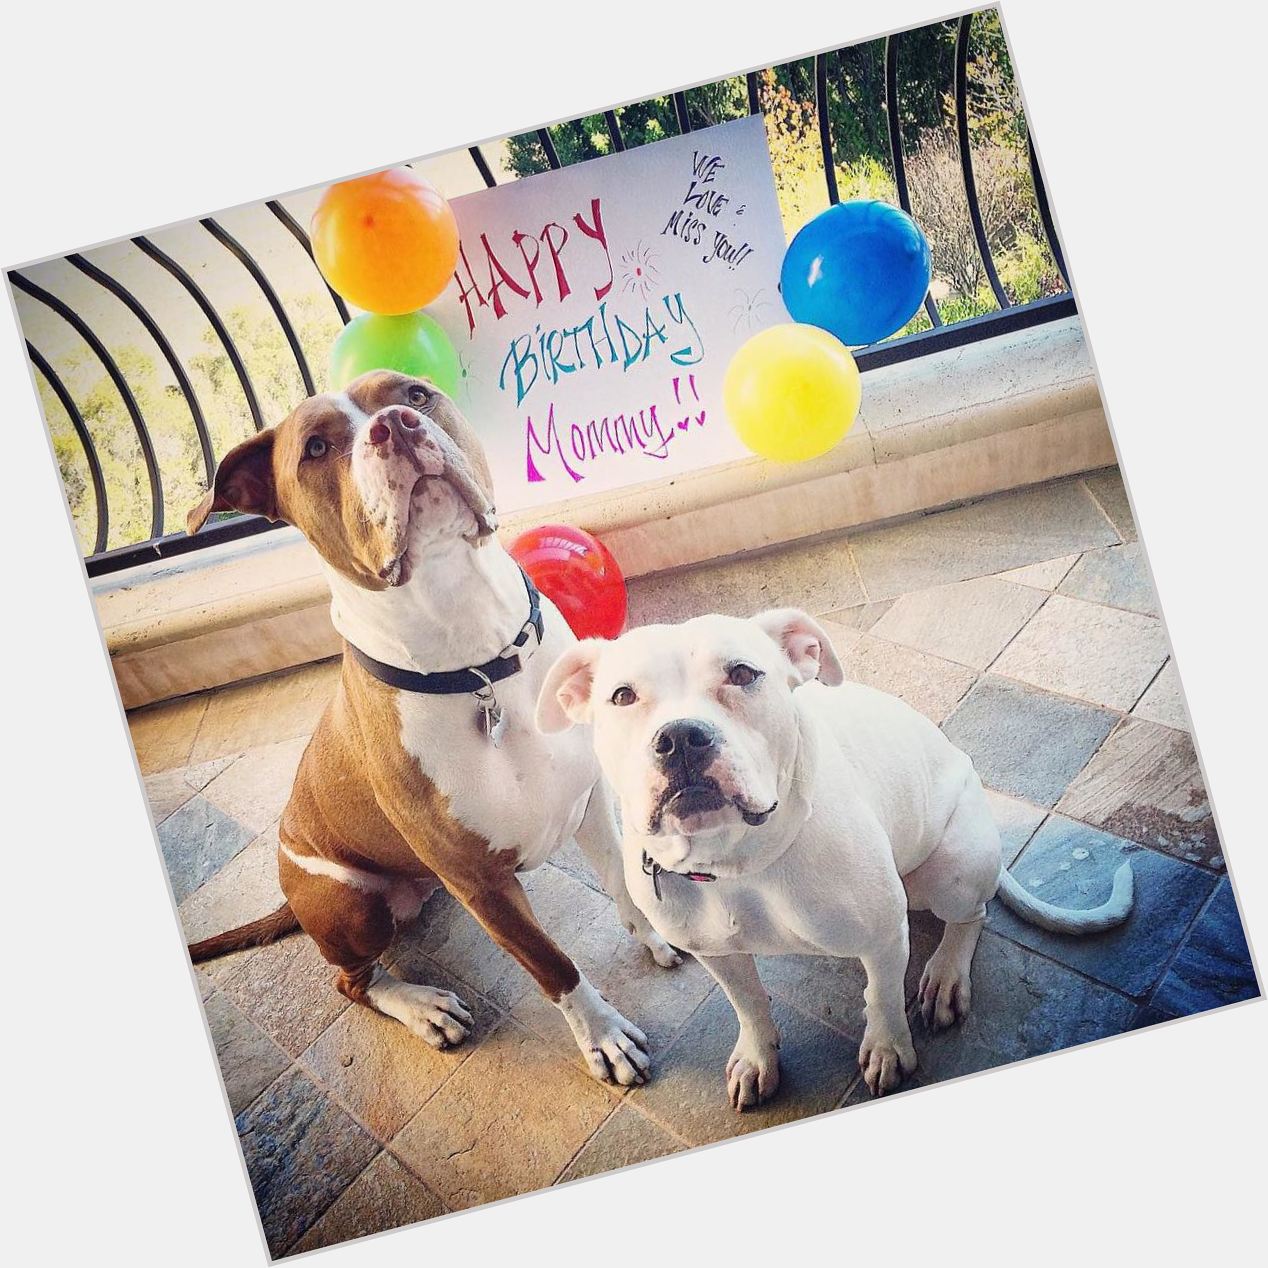 Daisy Fuentes: I m away from my babies on my bday & this pic made me happy. 